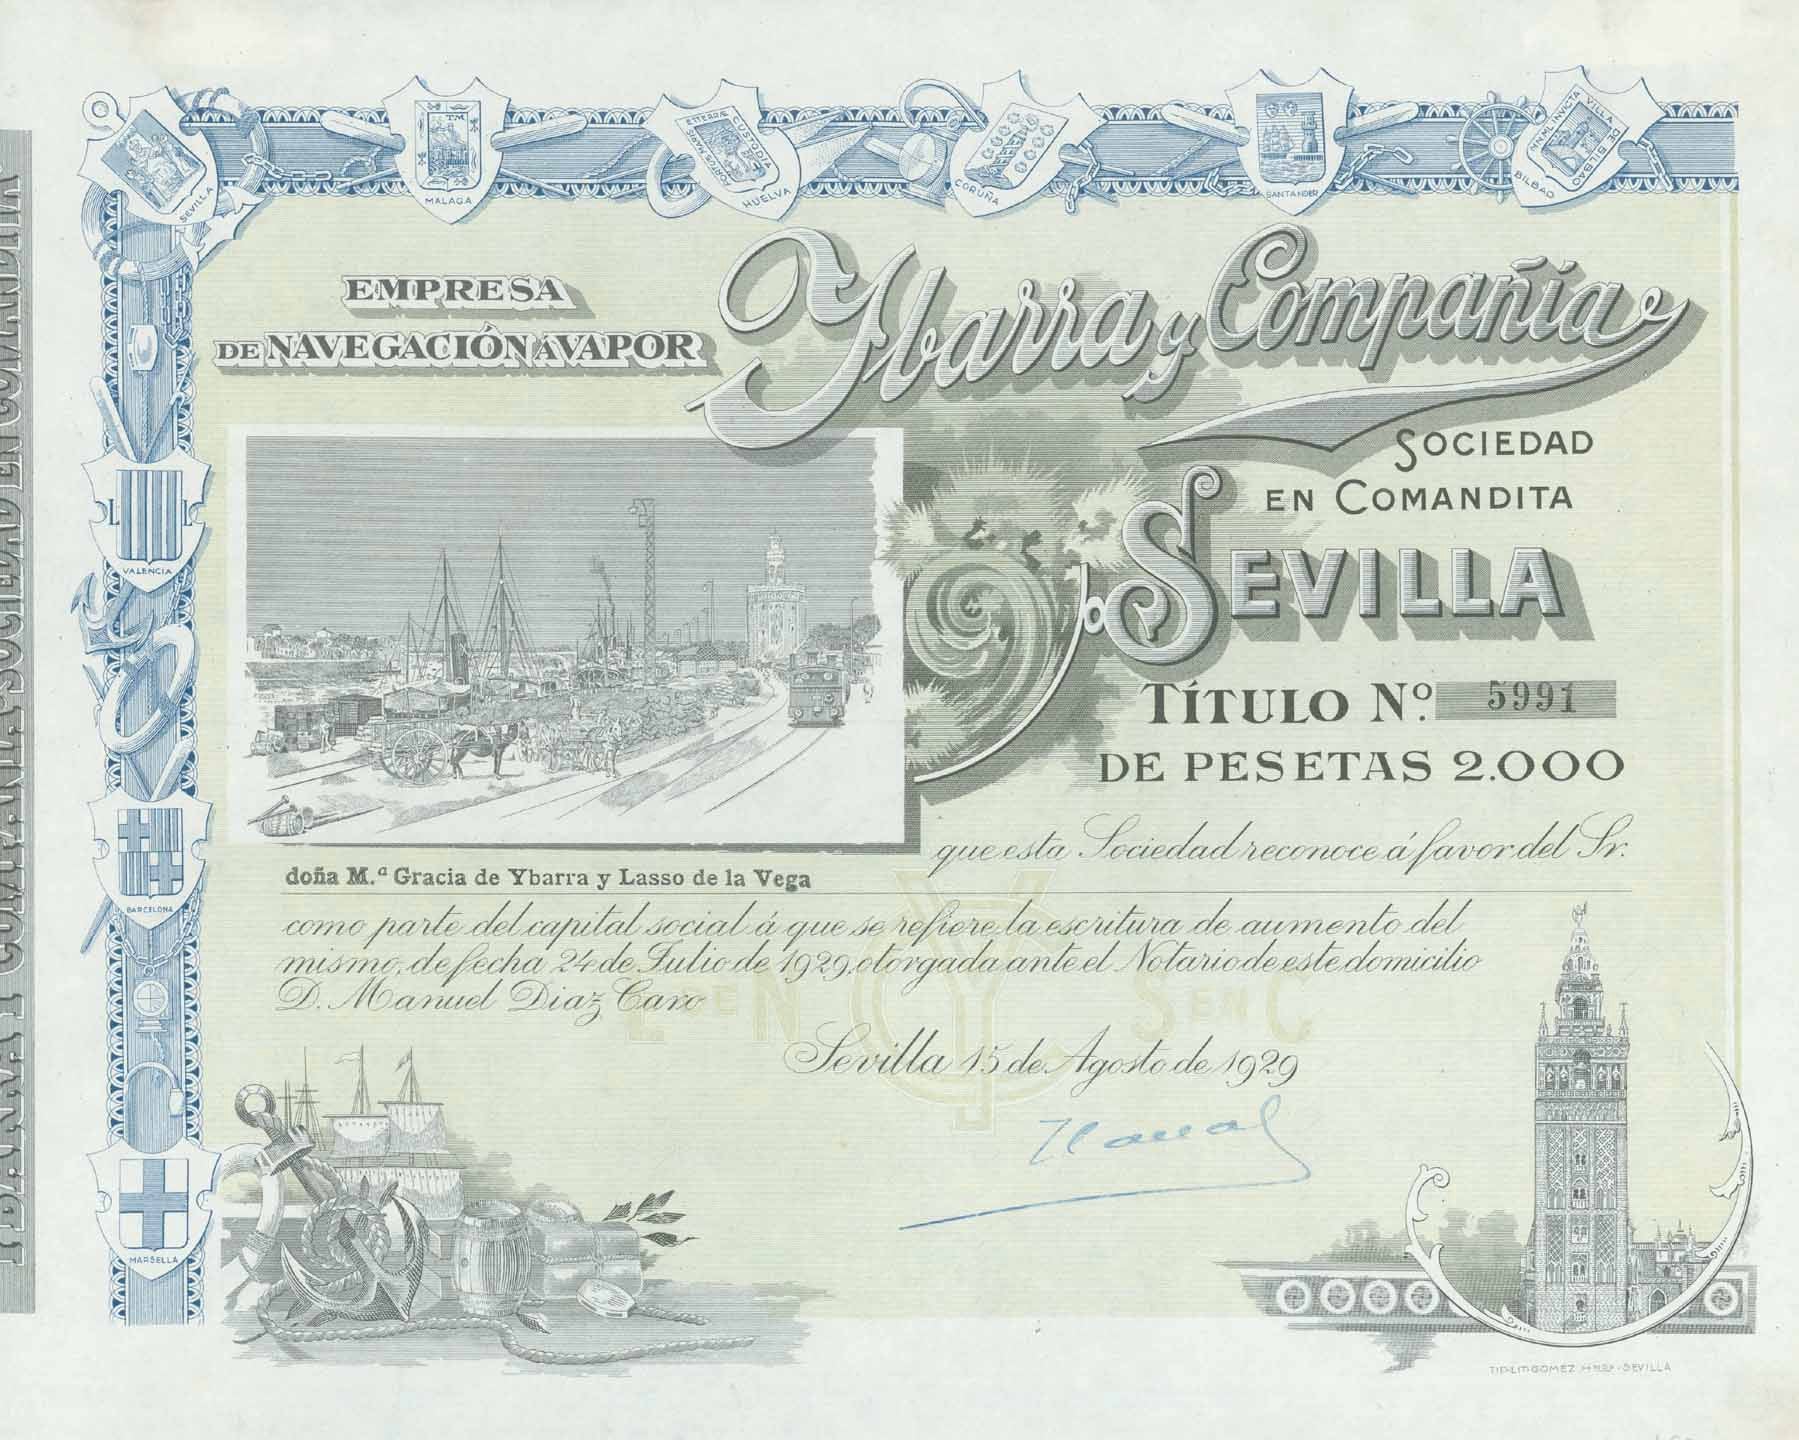 "Empresa de Navigacionavapor Ibarra y Compania... Sevilla"  This stock was printed in 1929 in Seville for the Ibarra Steamship Company.  On the reverse side is the the list for the shareholders - in this case it is unused.  Original antique print    This is an interesting piece for collectors of stocks (Aktien)